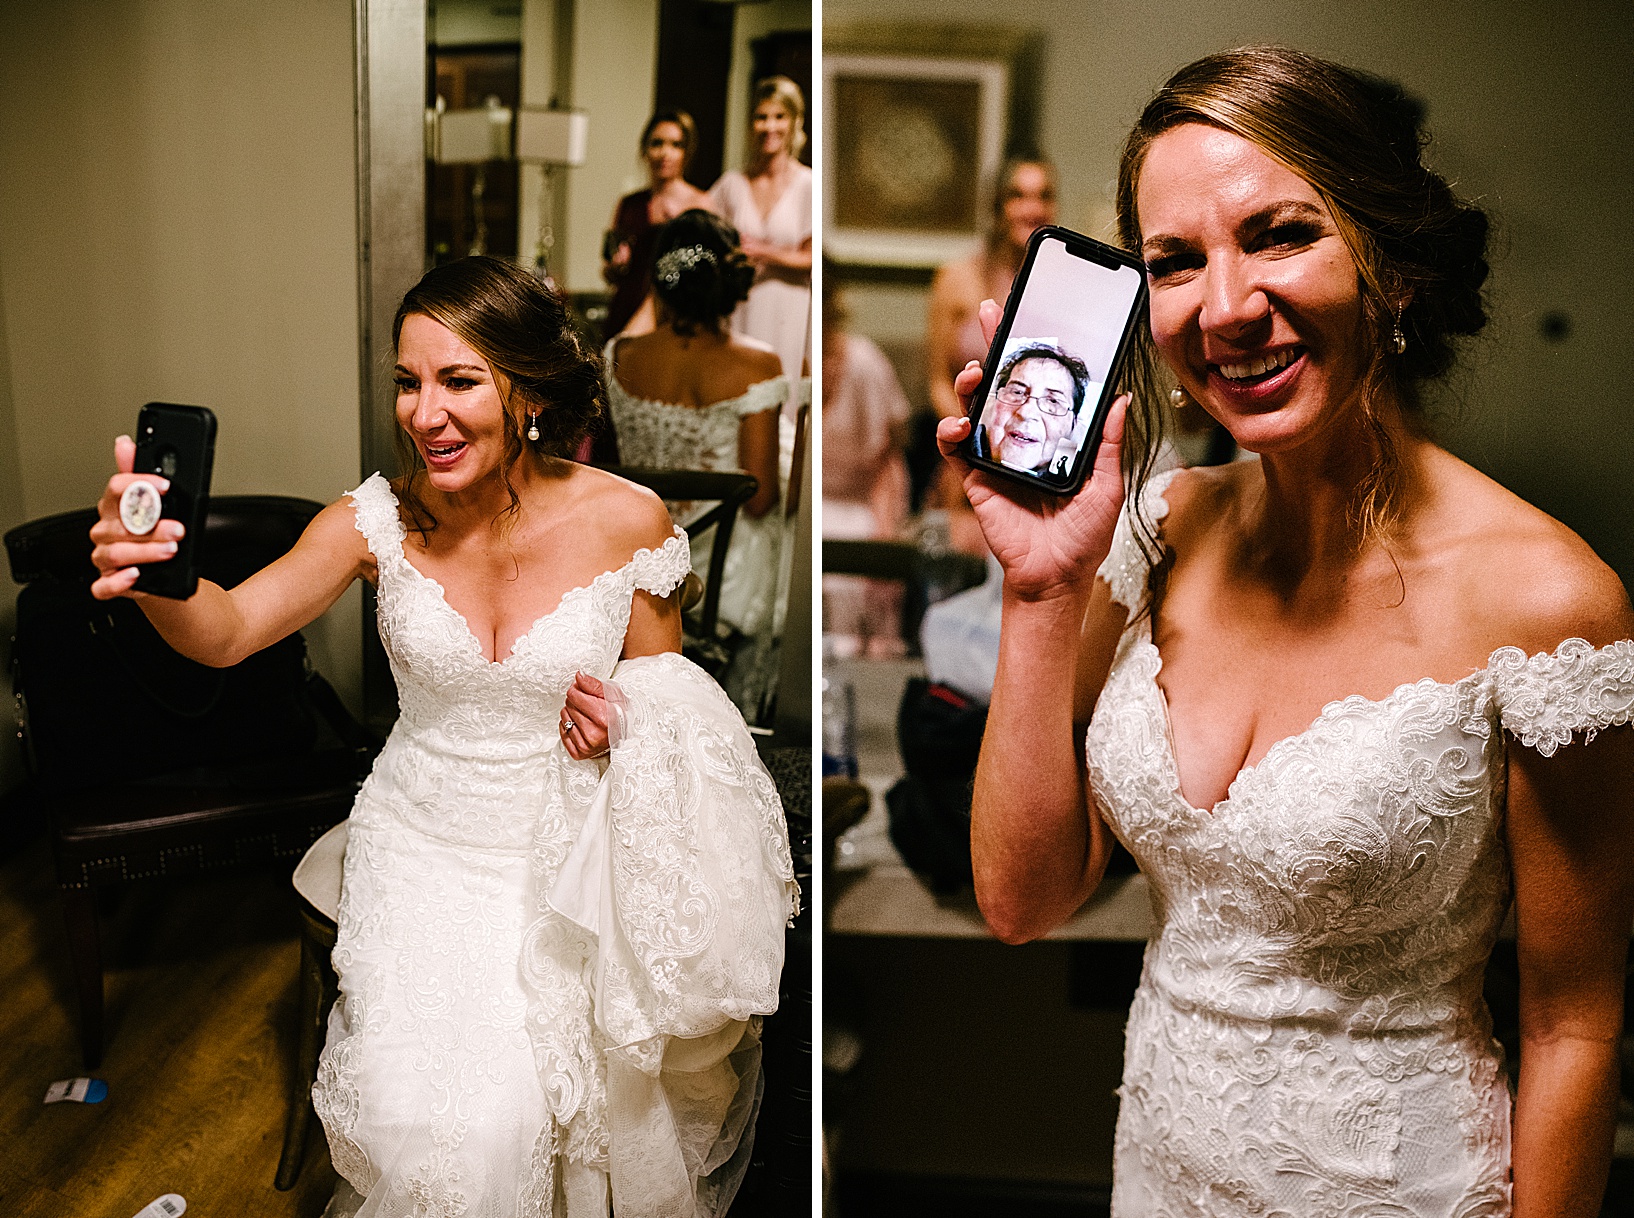 The bride facetiming with an older woman in her wedding dress